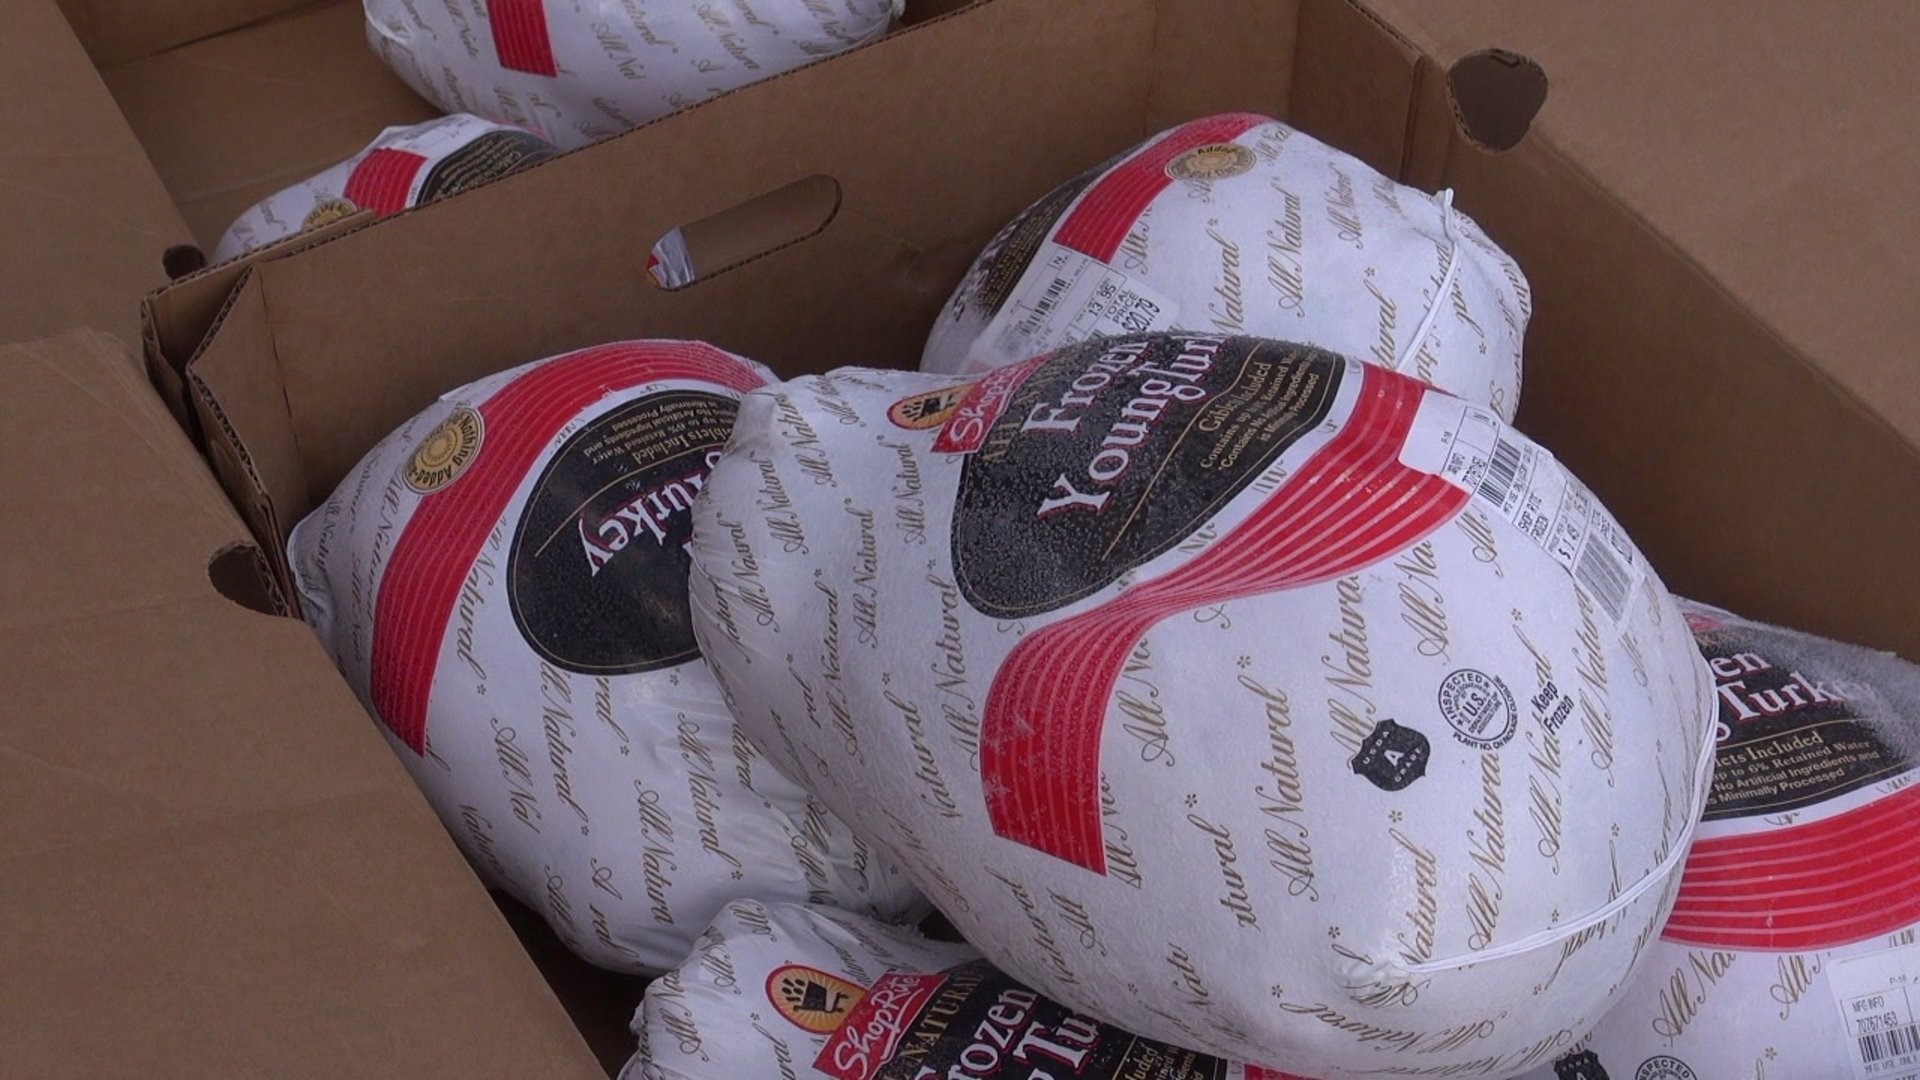 Thanksgiving Food Baskets Distributed in Wyoming County